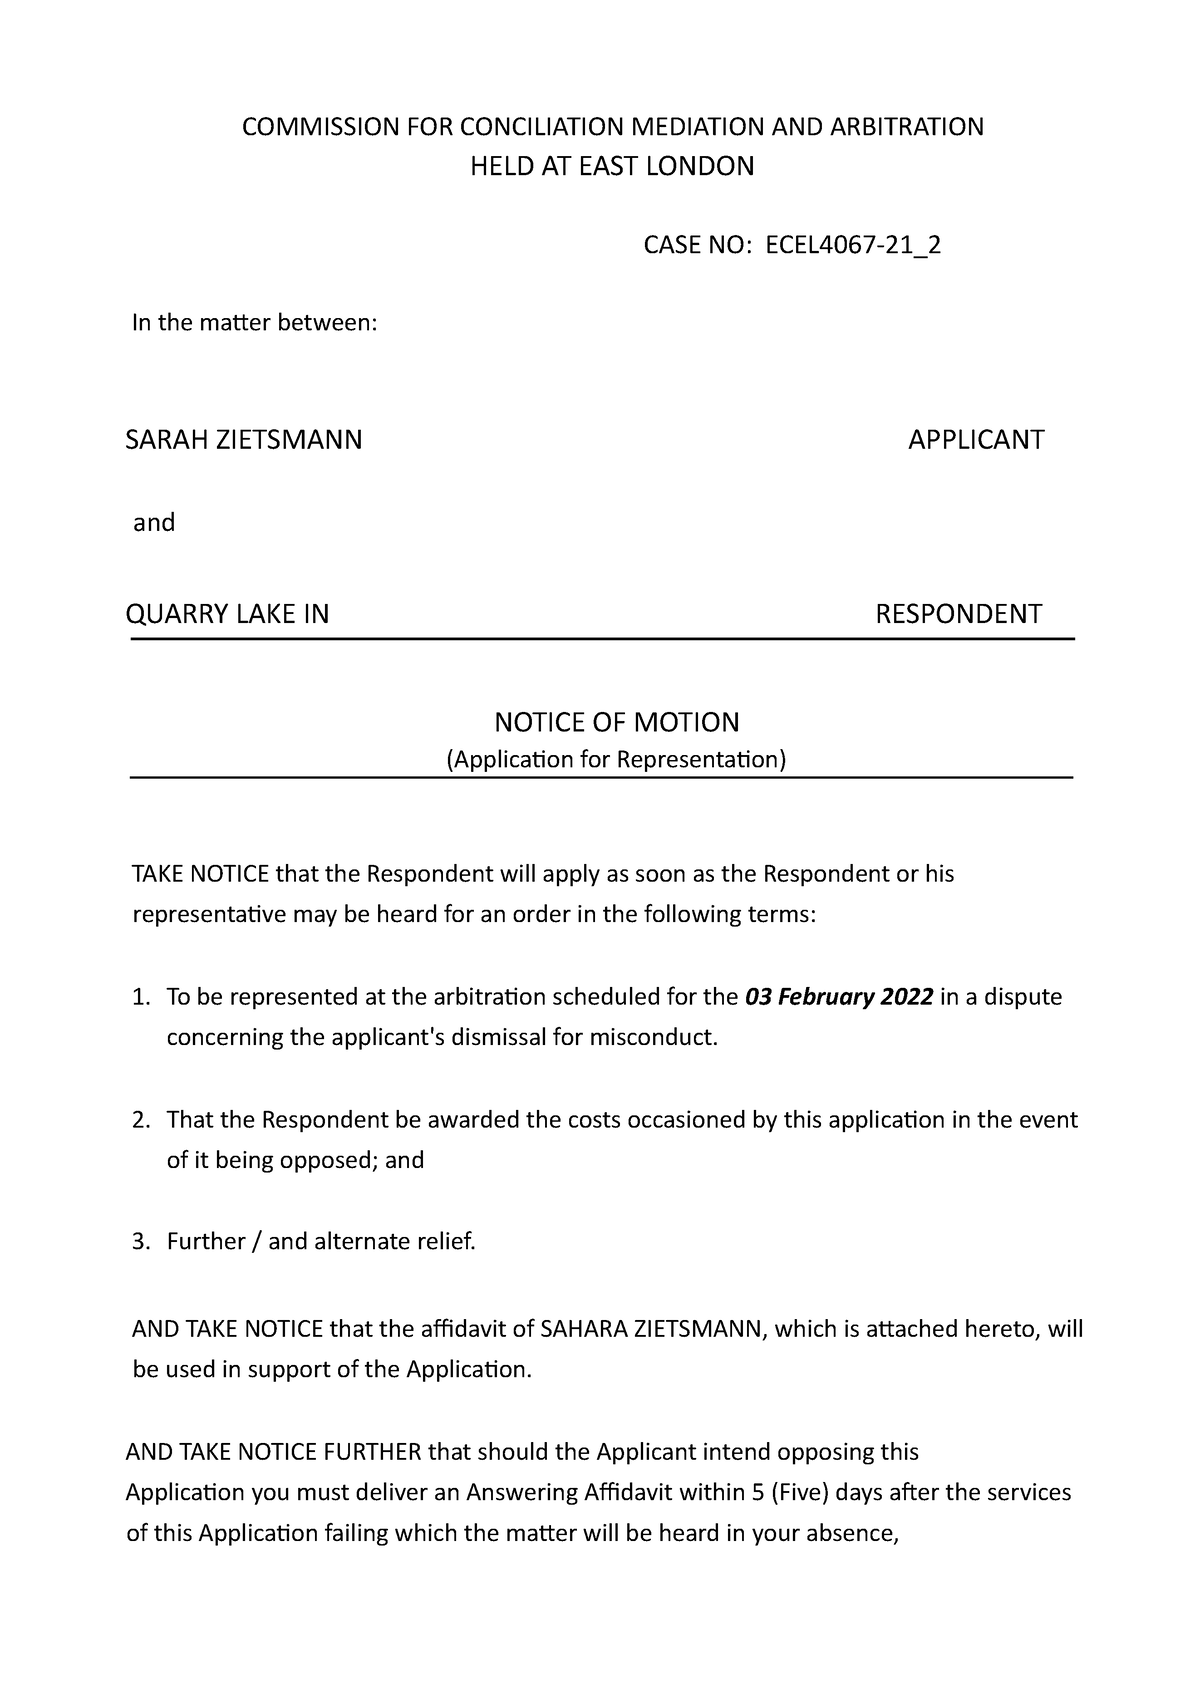 Notice of Motion (Application for Representation) Template COMMISSION